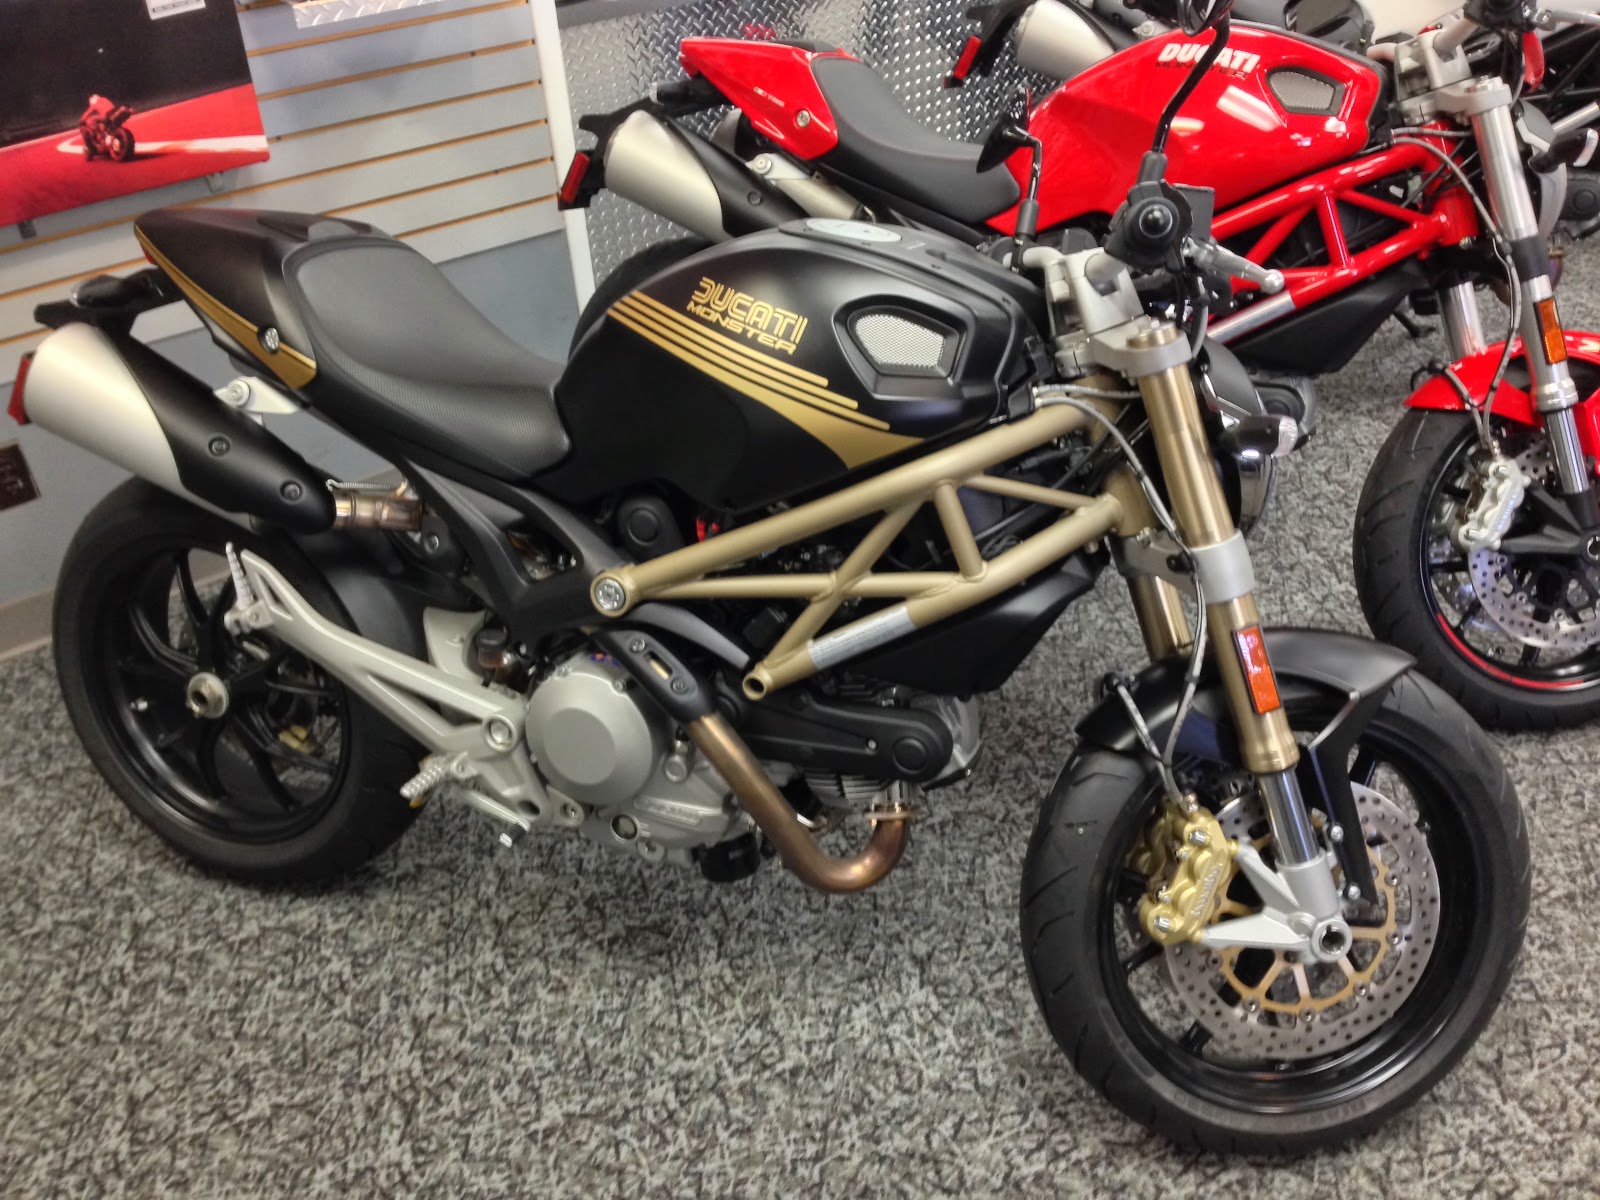 2013 Ducati Monster 796 Darmah Edition at Koups Cycle Shop by NYDucati | 899Adventures.com